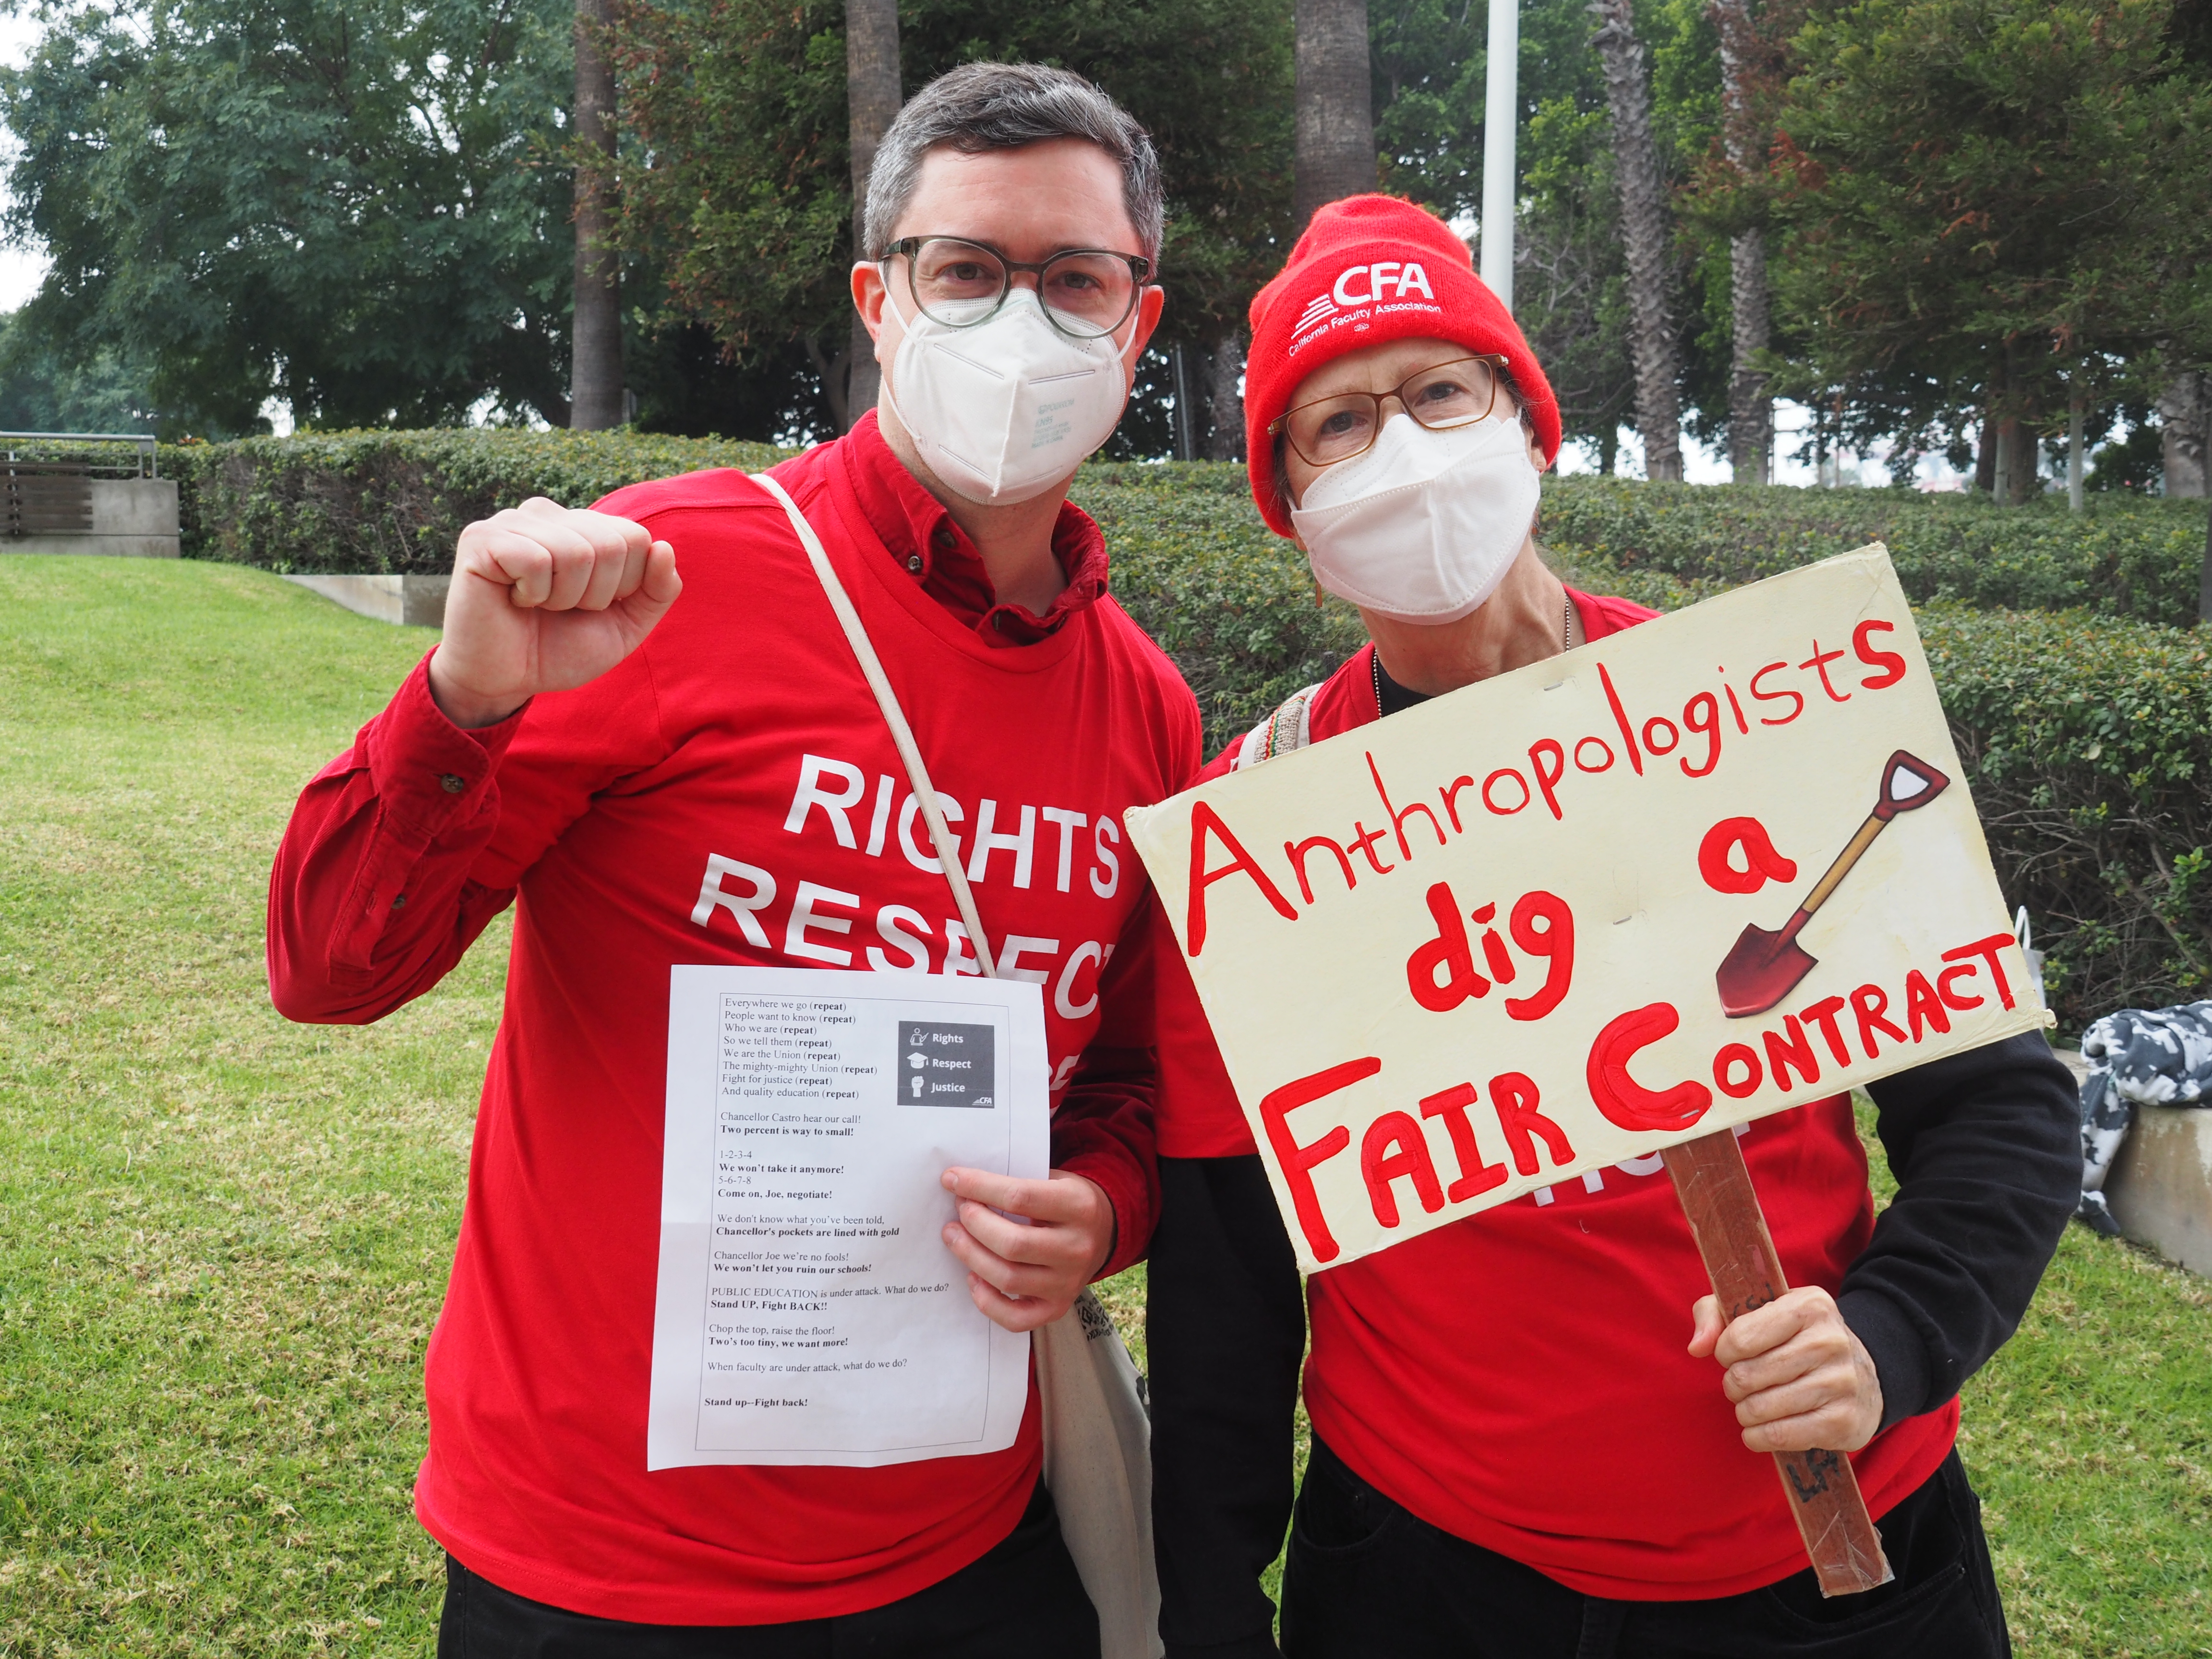 CFA members pose with signs supporting a fair contract.